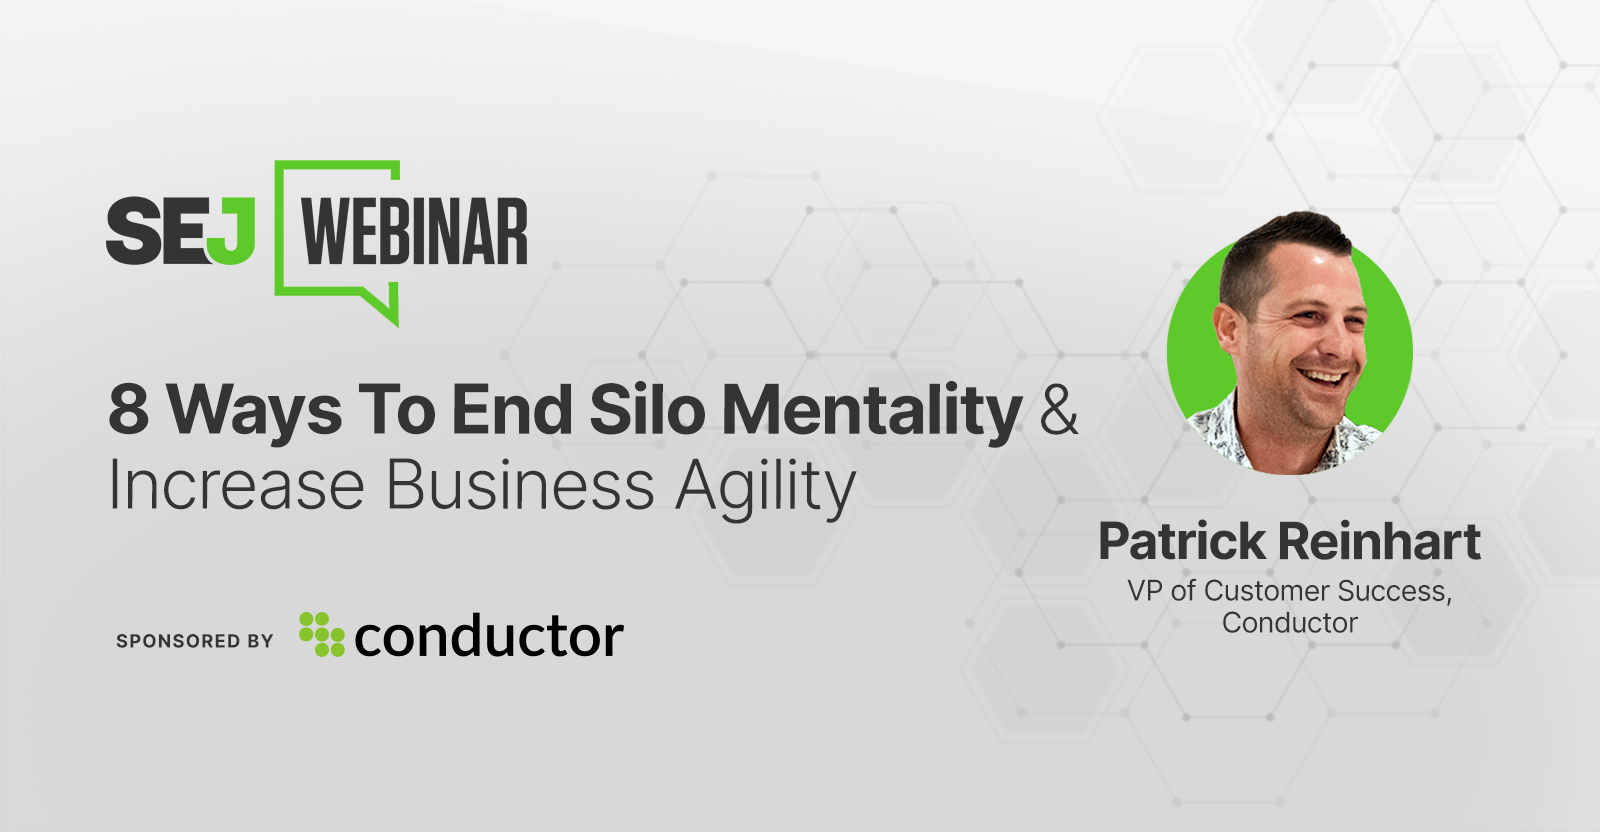 8 Ways To End Silo Mentality & Increase Business Agility